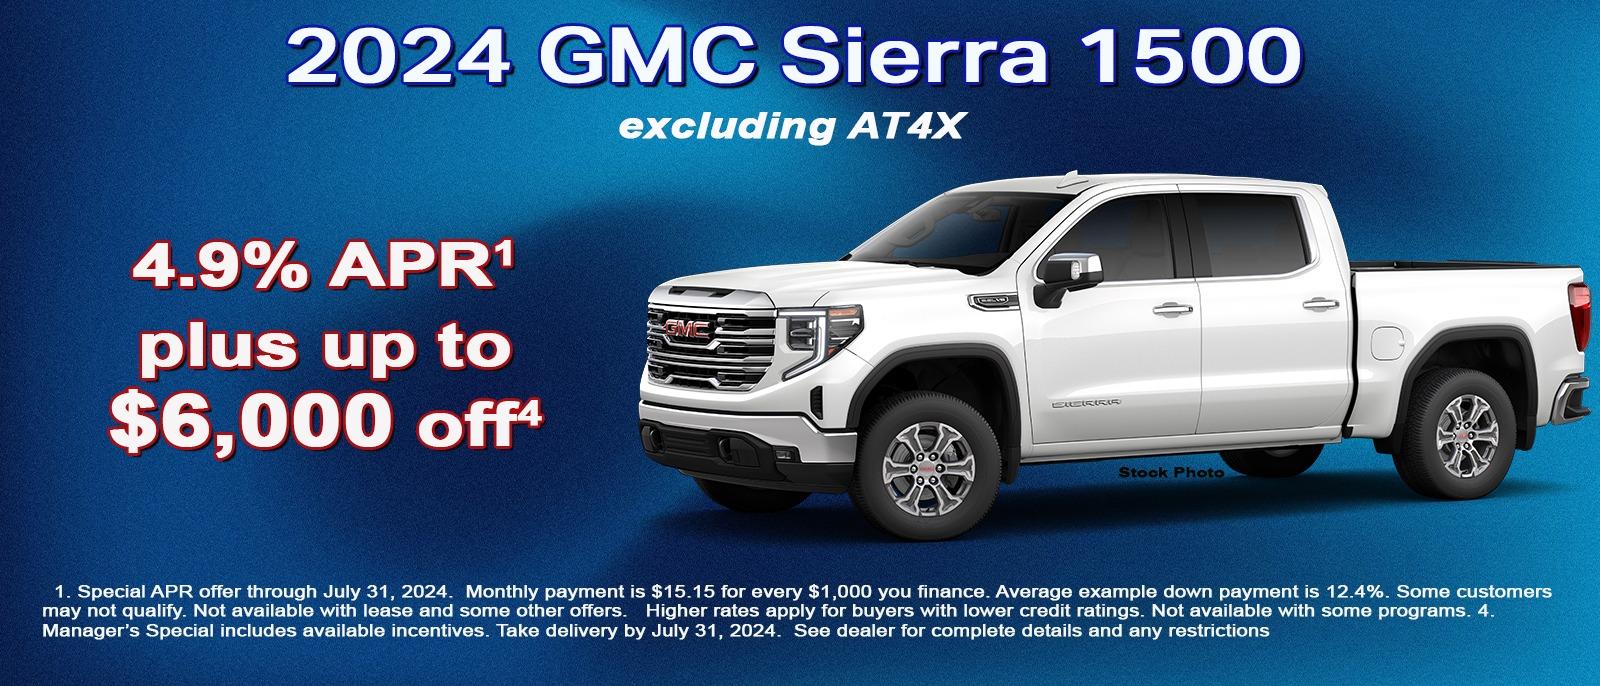 Save up to $6000 on your new GMC Sierra 1500 4x4